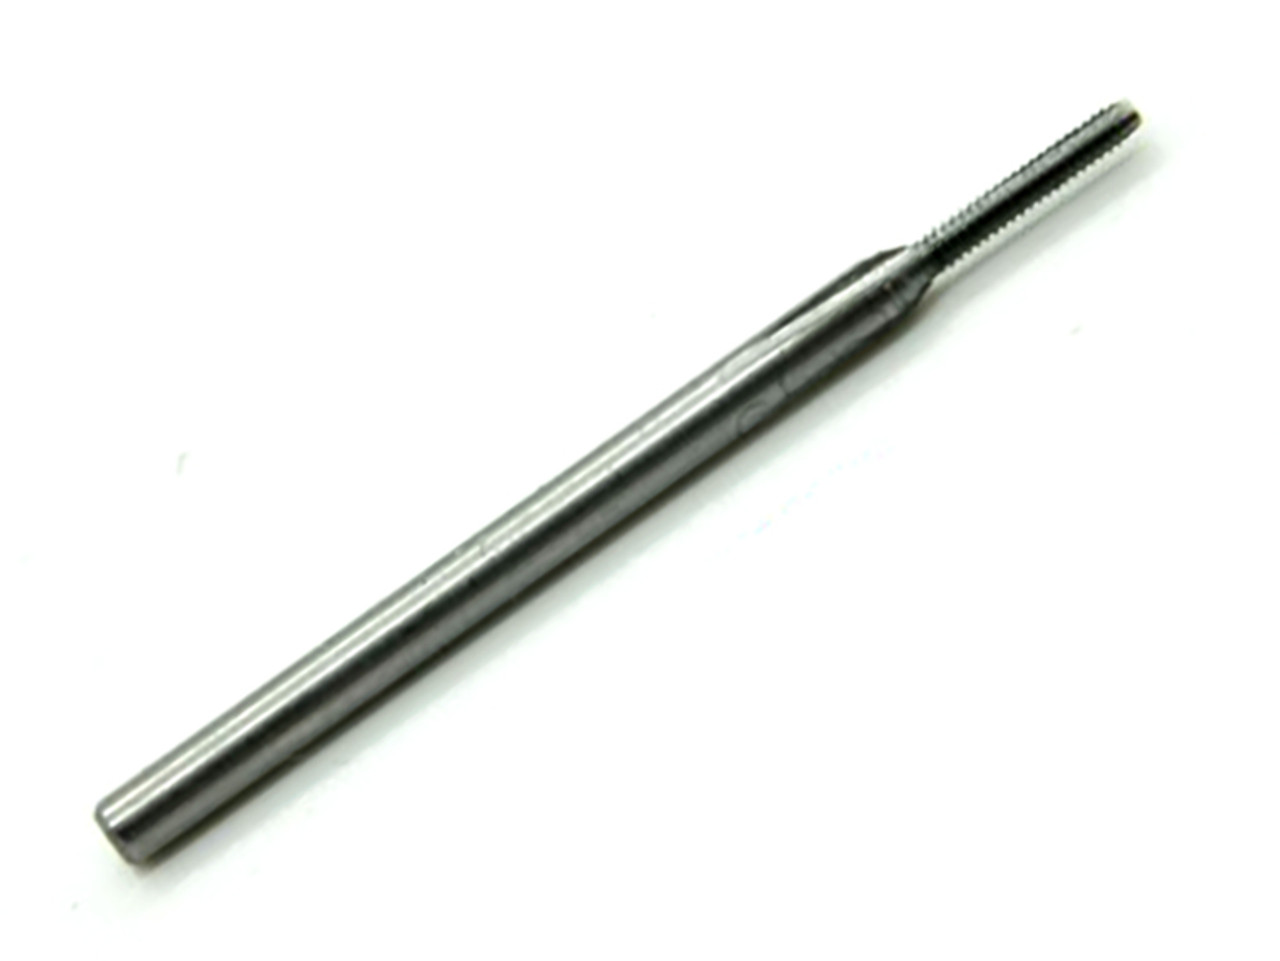 000-120 Tap
3 Flute Bottoming
American Miniature (to ANSI B18.6.3) Size 000 Thread 120 Per Inch
Class NS-2
Shank 0.060"
Made from Hardened High Speed Steel
Designed for Production Tapping in Automatic Screw Machines, Tappers, CNC Lathes, and CNC Mills
Overall length of tap is 25mm (0.984") threaded length (tip to end of thread) 5.5mm (0.216"). Lengths can vary slightly between batches.